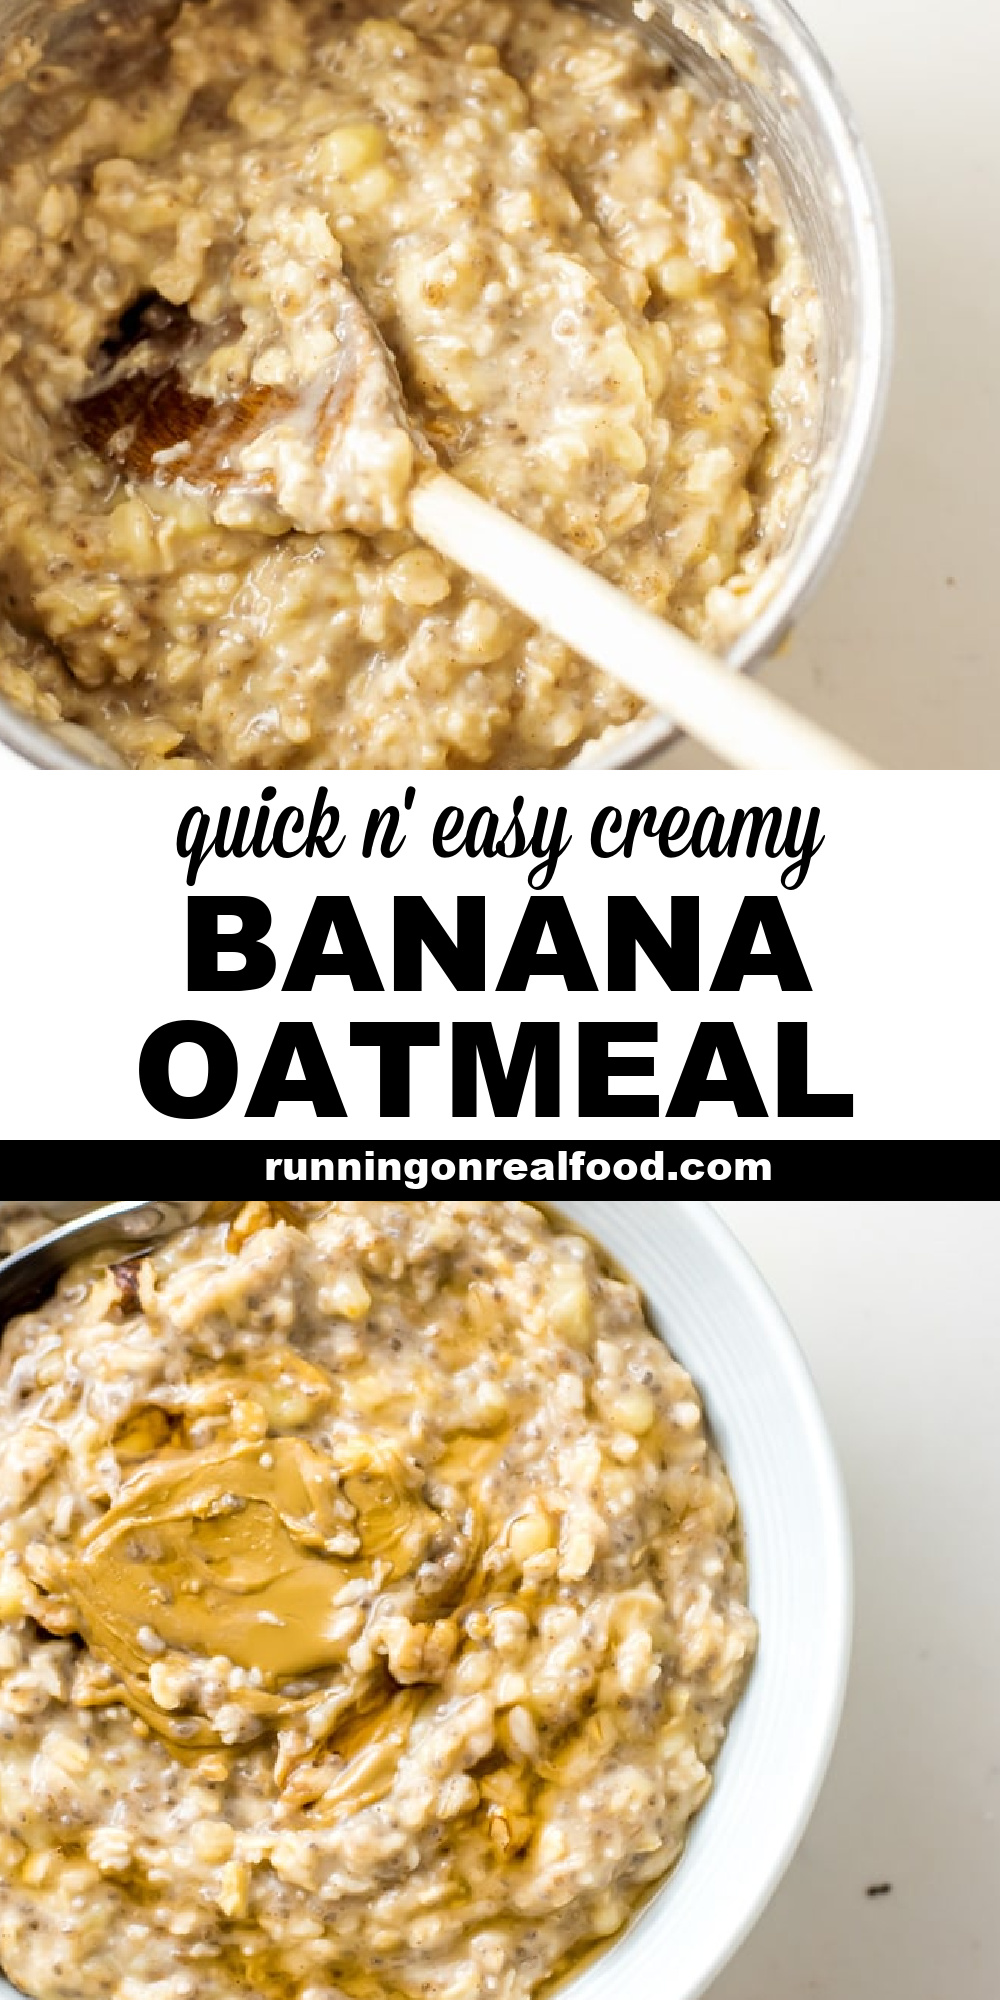 Pinterest graphic with an image and text for creamy banana oatmeal.